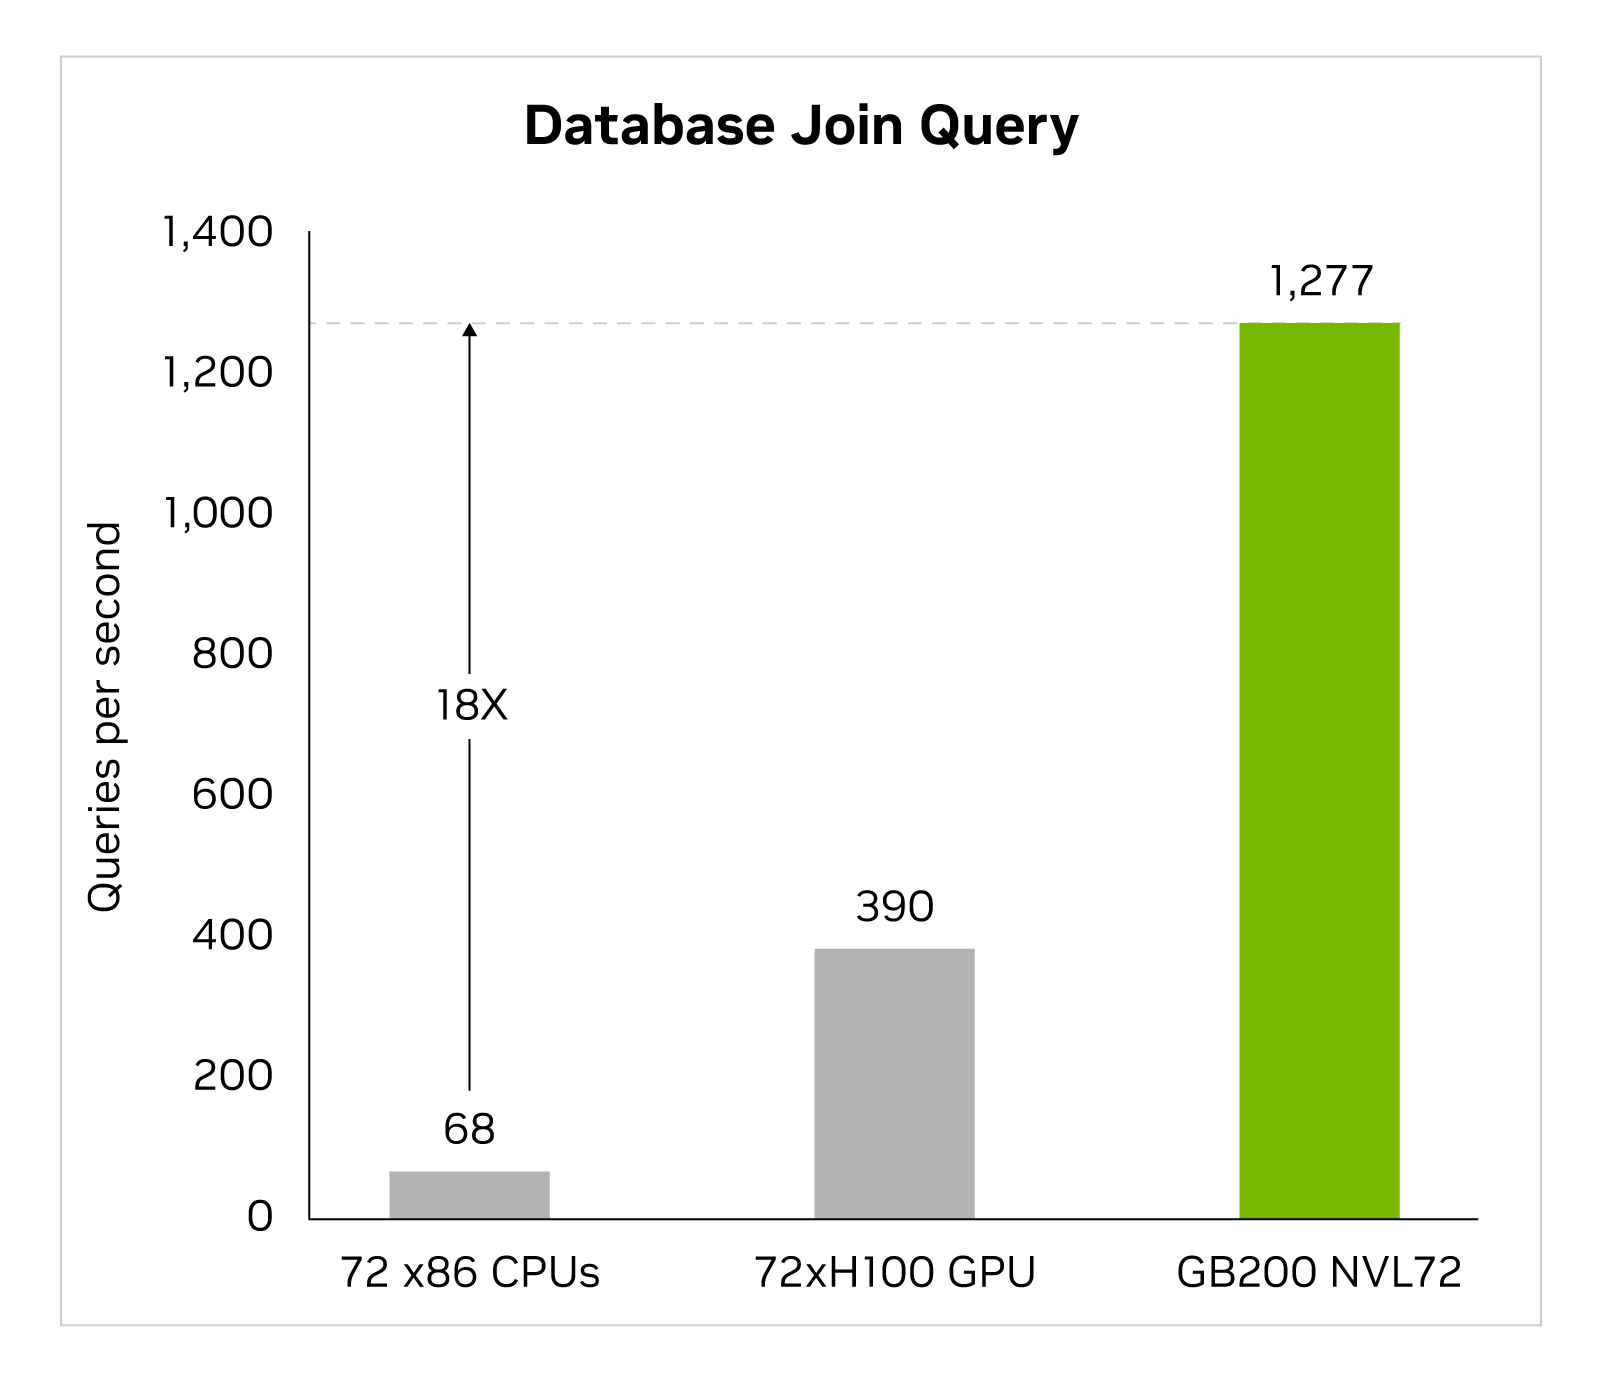 Bar chart with 3 columns for x86, H100, GB200 comparing queries per sec. 72 x86 is 68, 72xH100 is 390, and GB200 NVL72 is 1277, 18X more than x86.